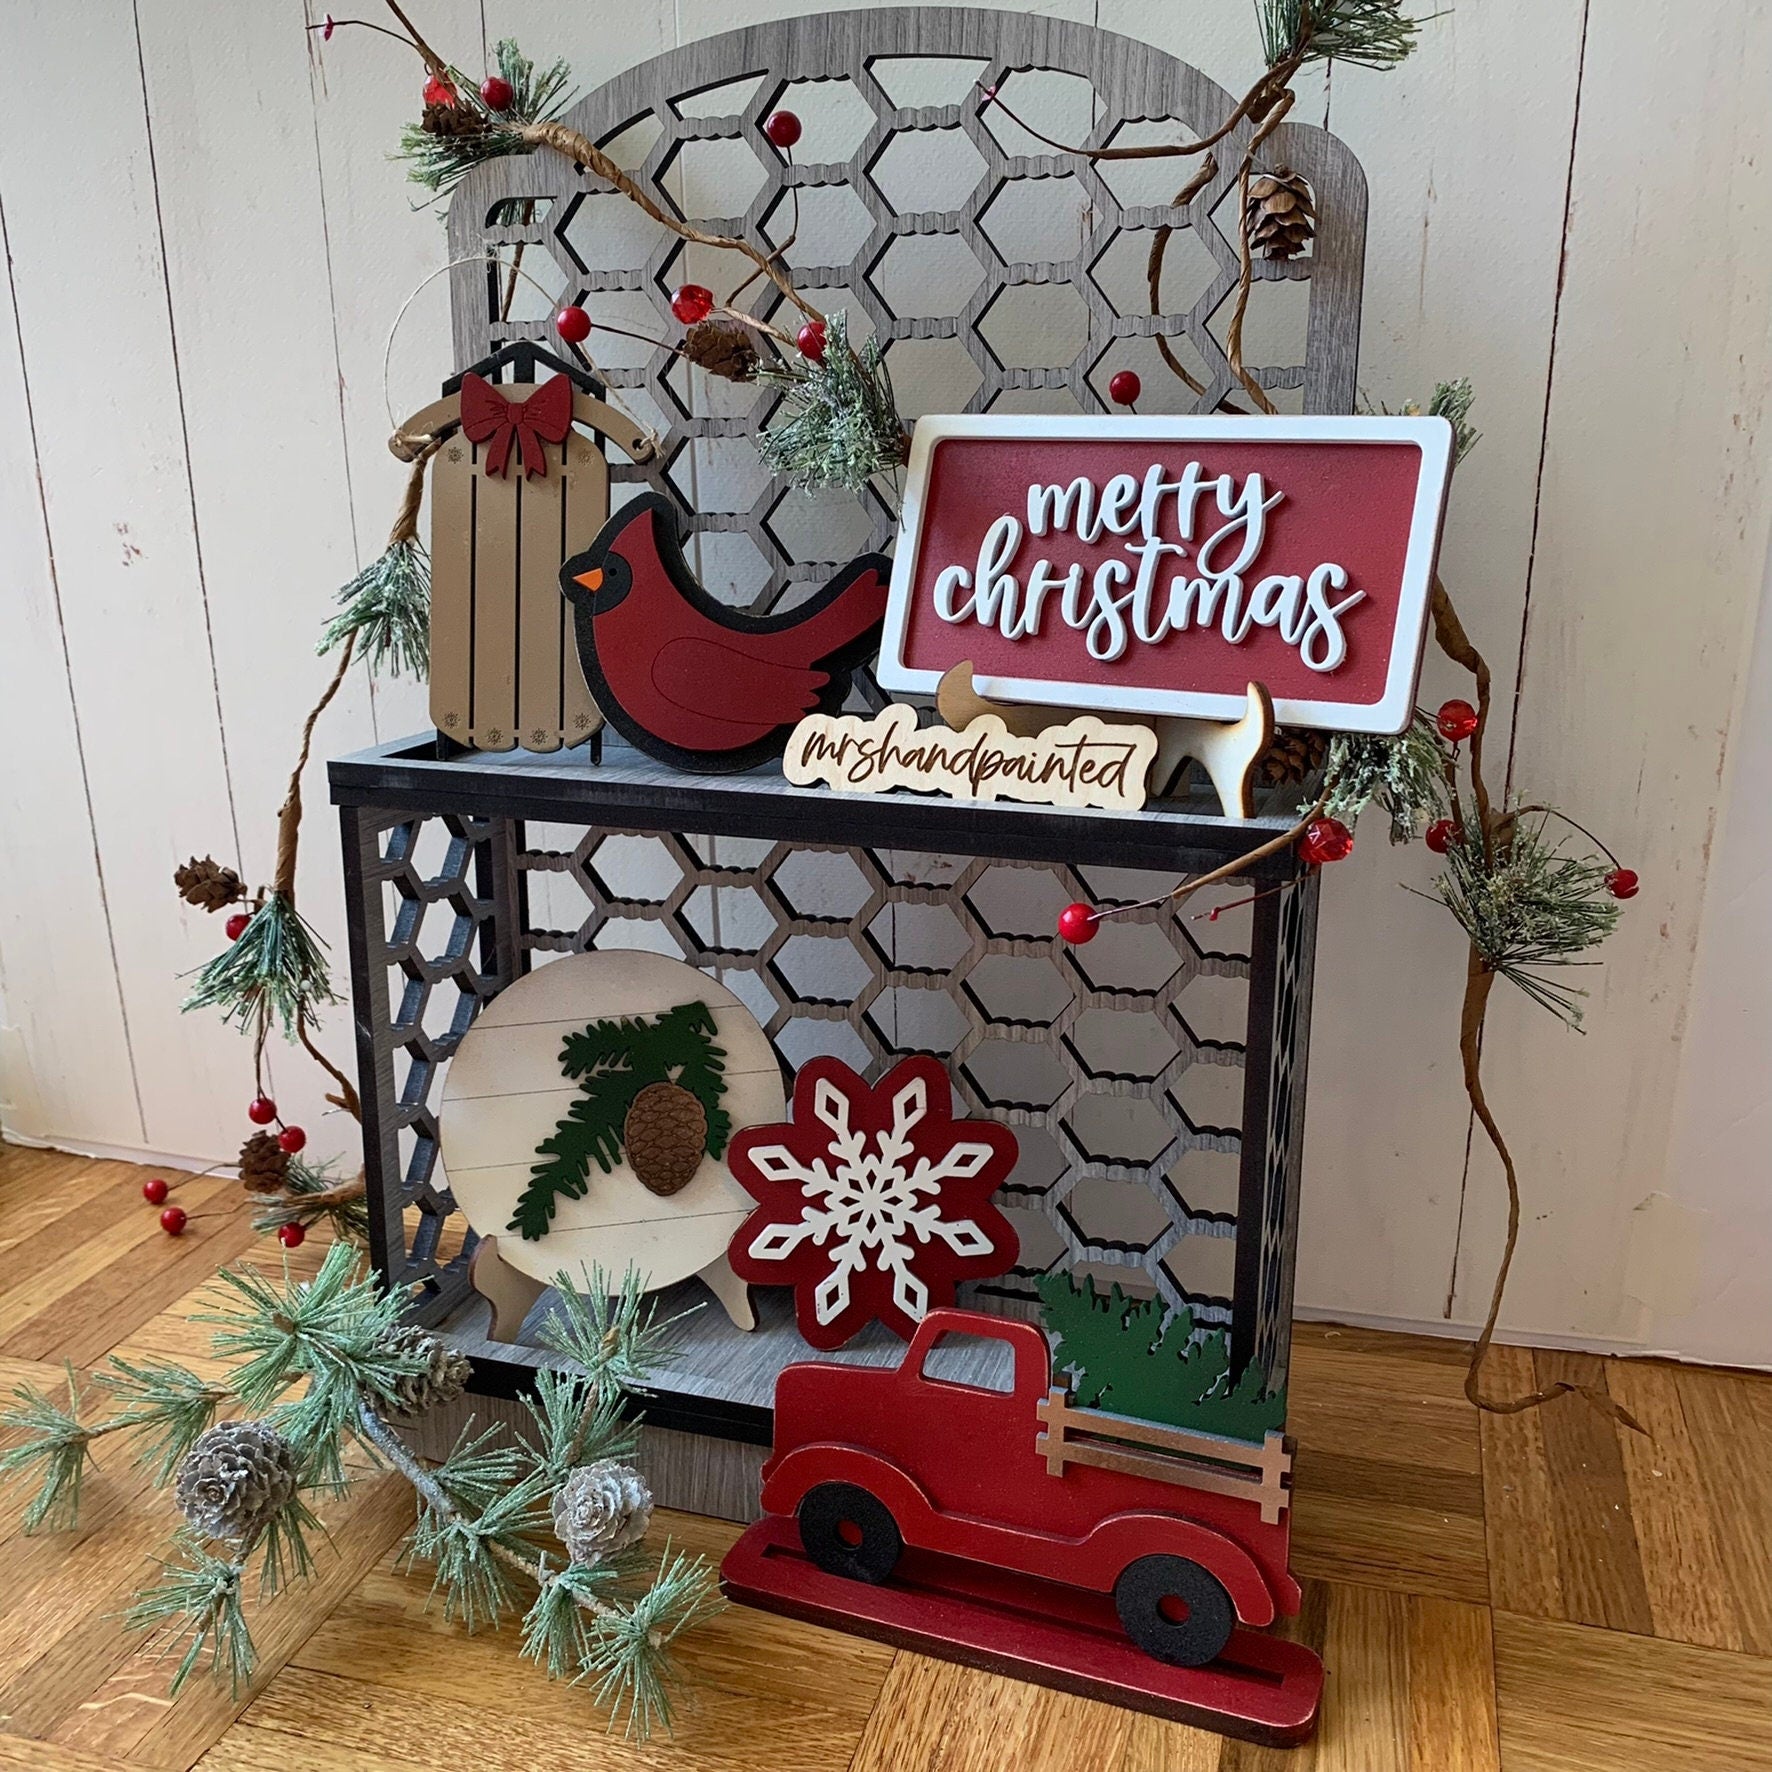 Farmhouse Christmas Tiered Tray Decor - Laser Cut Wood Painted